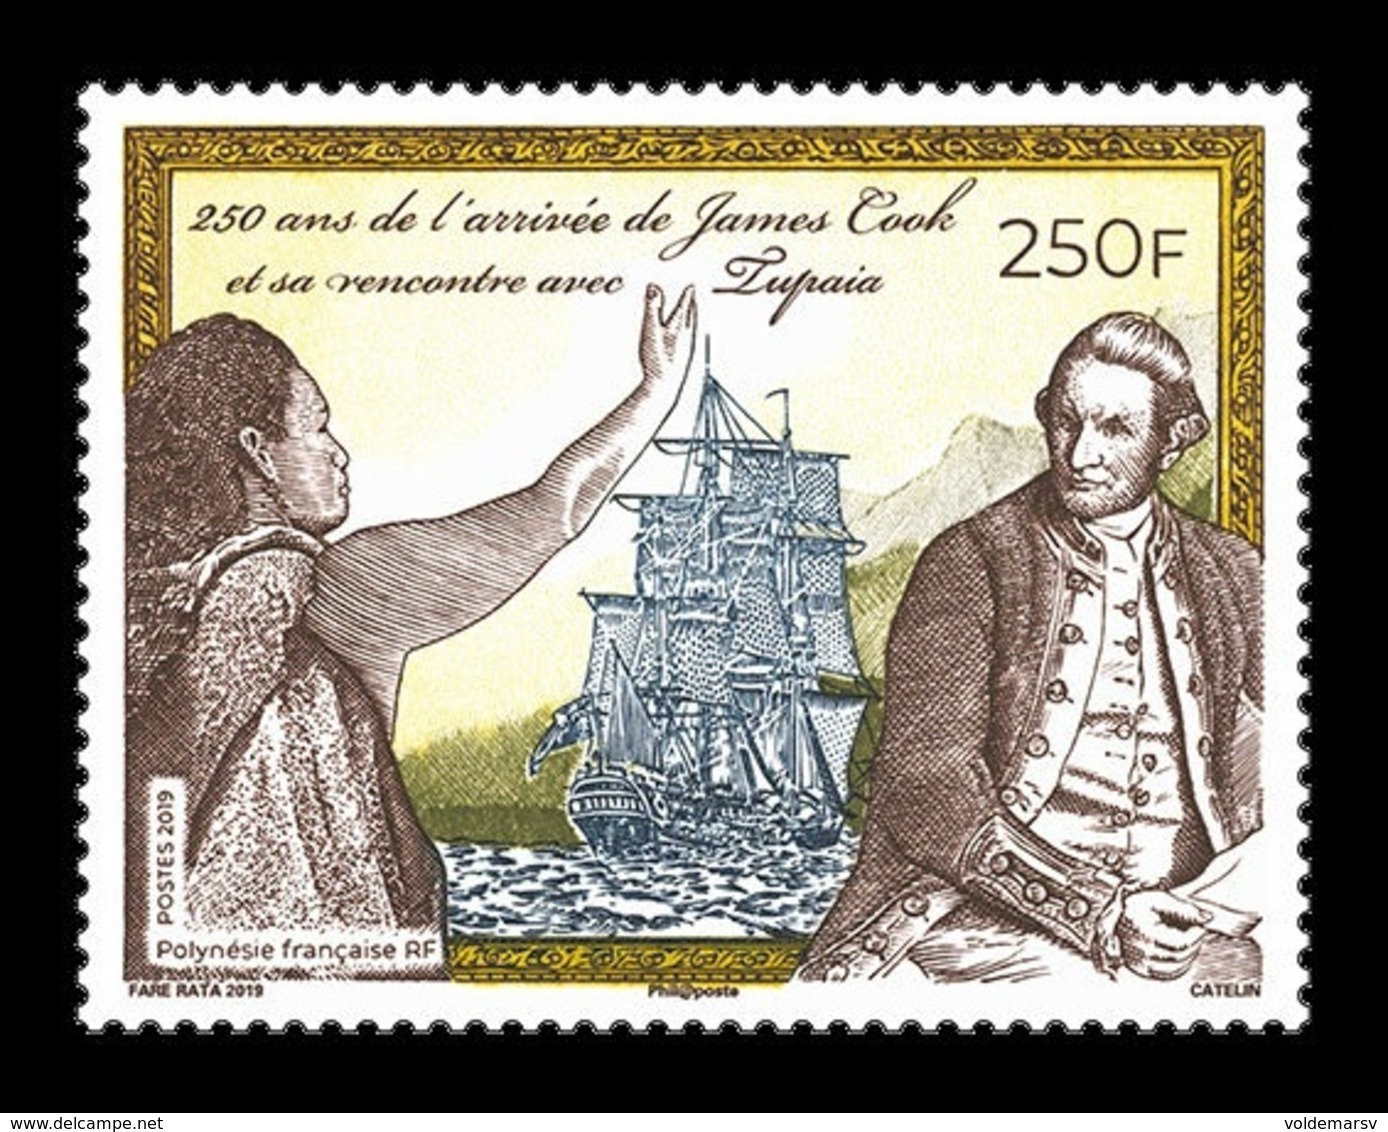 French Polynesia 2019 Mih. 1411 Arrival Of Expedition Of James Cook To Polynesia. Ship MNH ** - Neufs